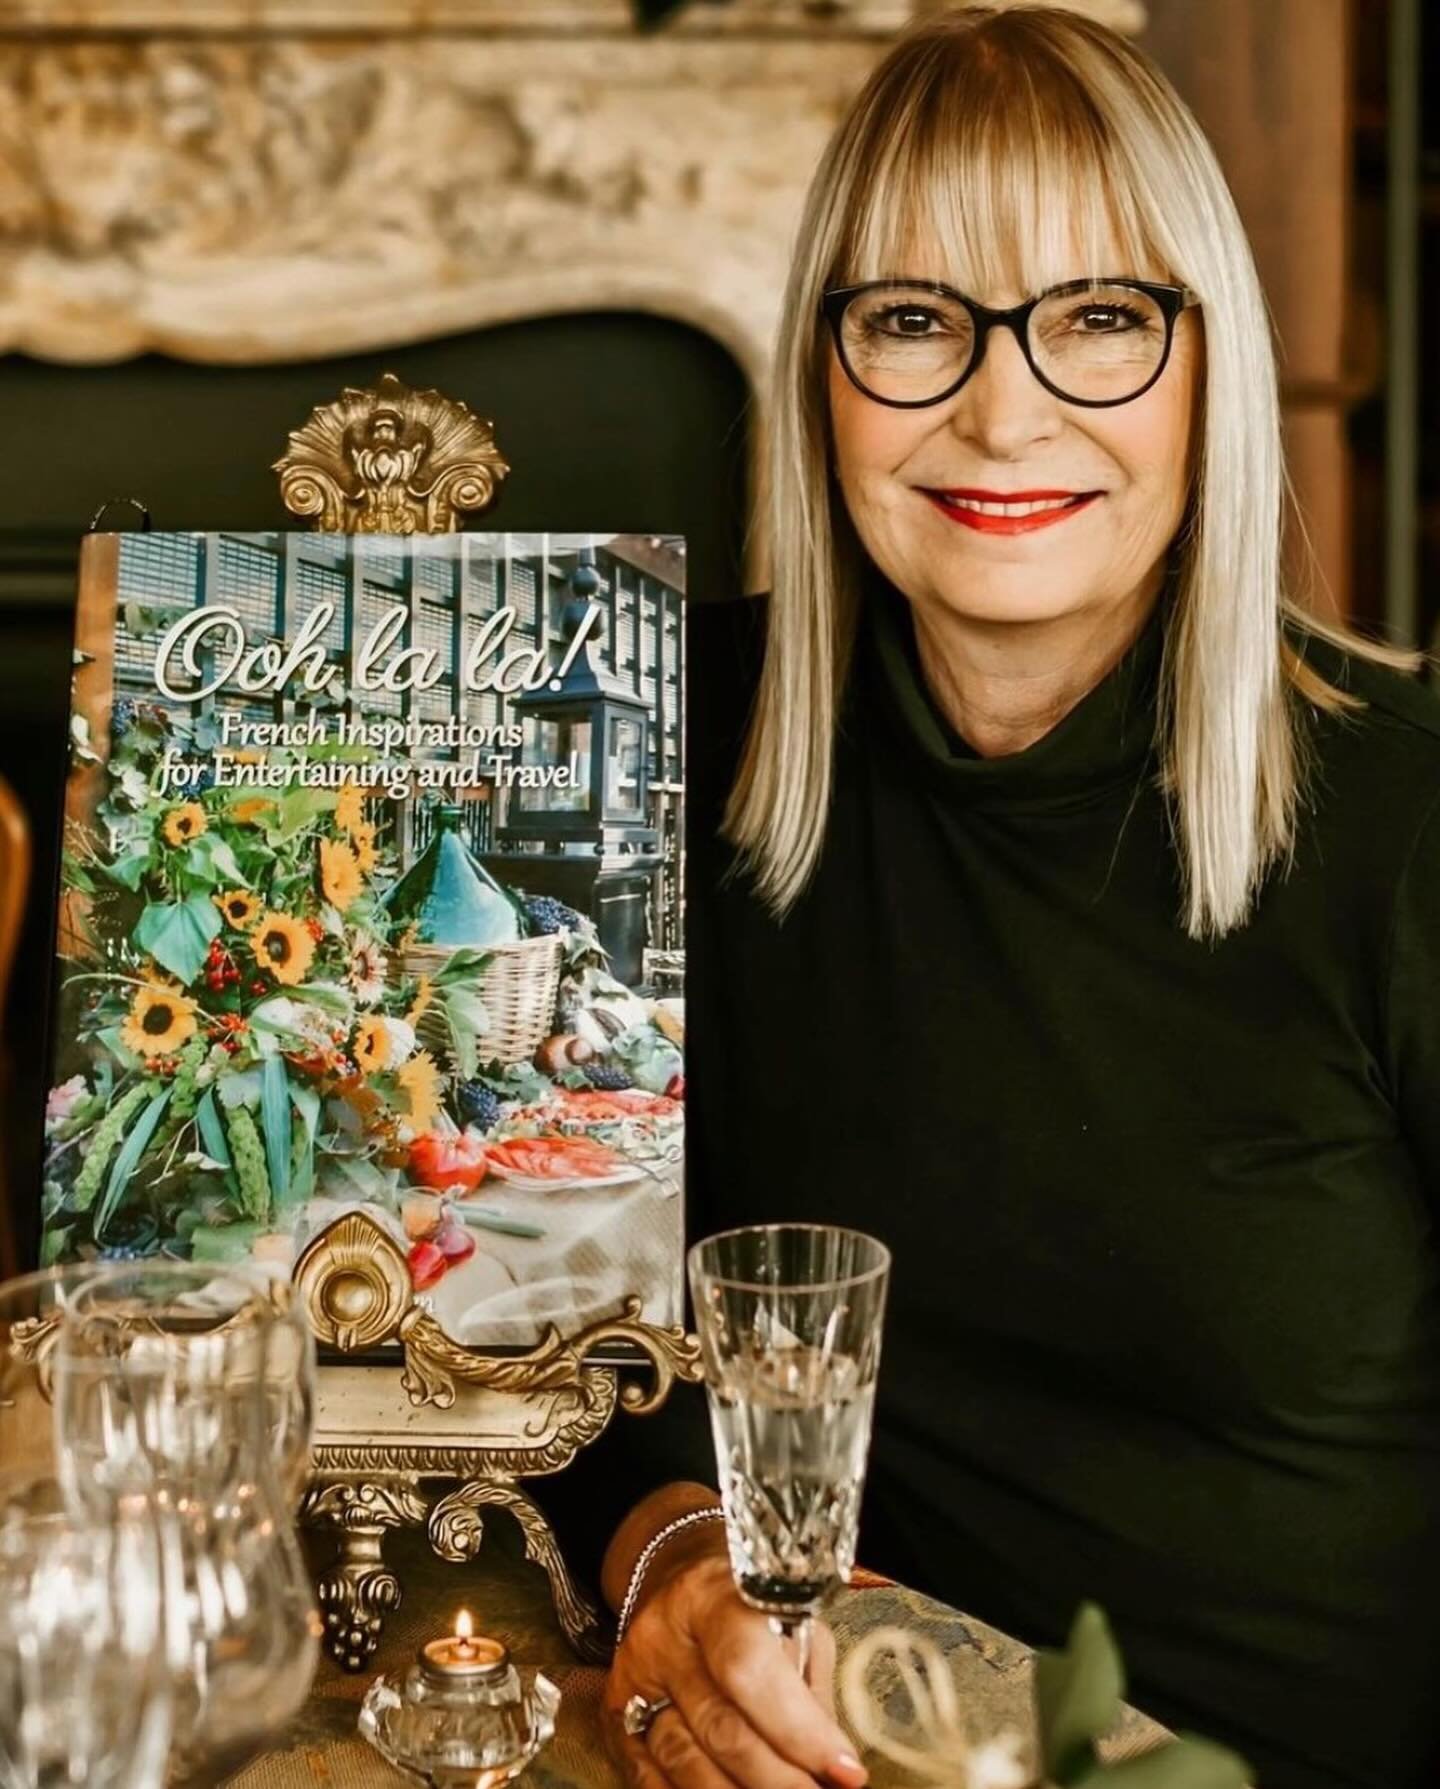 📣📕 SPECIAL EVENT TODAY AT THE MARKETPLACE!! Join us for a morning filled with great conversations and aromatic ☕️ with the remarkable Karen Allen, author of our favorite book of the year: &ldquo;Ooh la la! French Inspirations for Entertaining and T